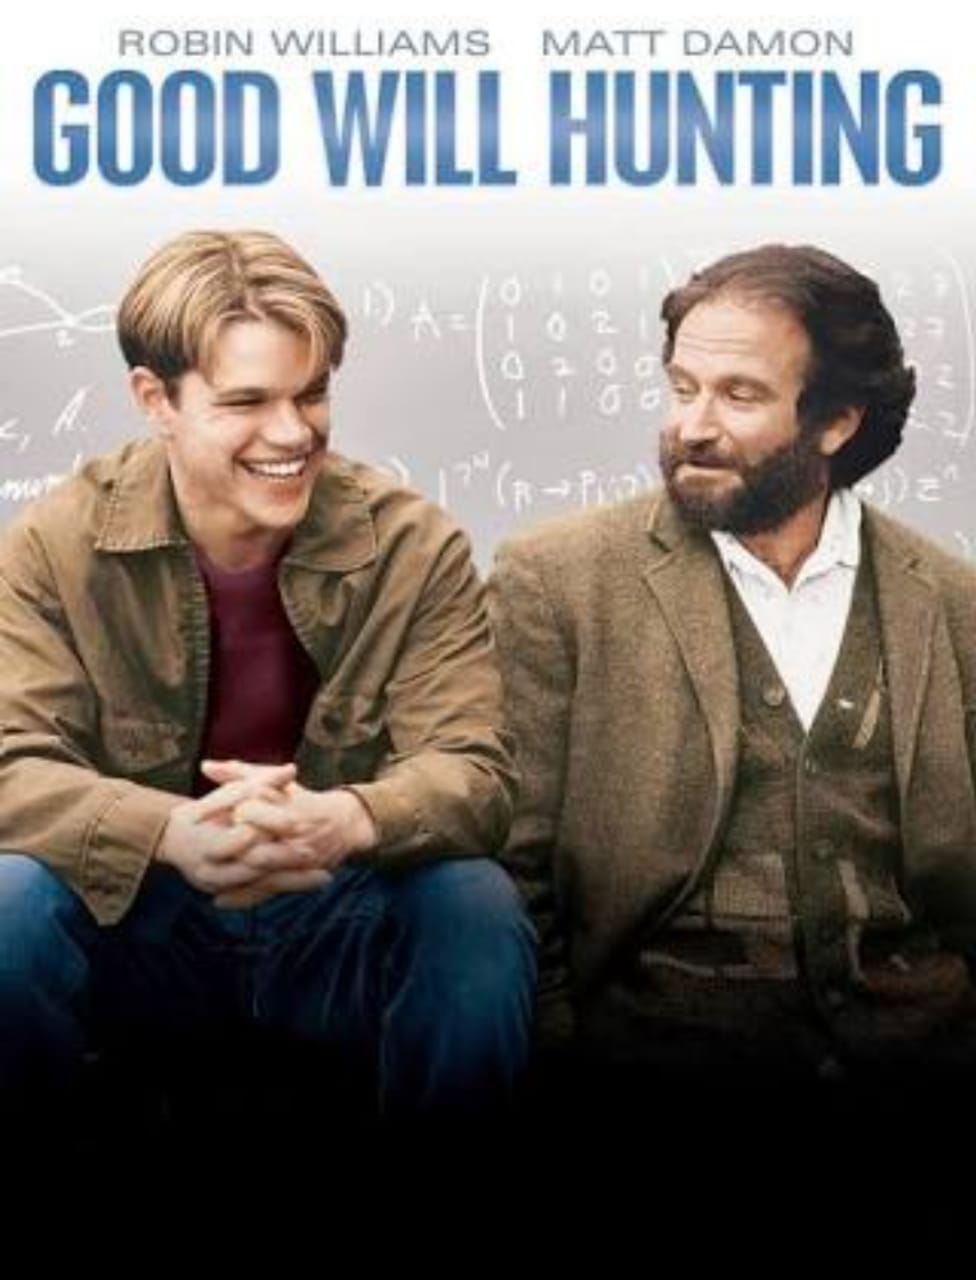 Cover film GOOD WILL HUNTING.